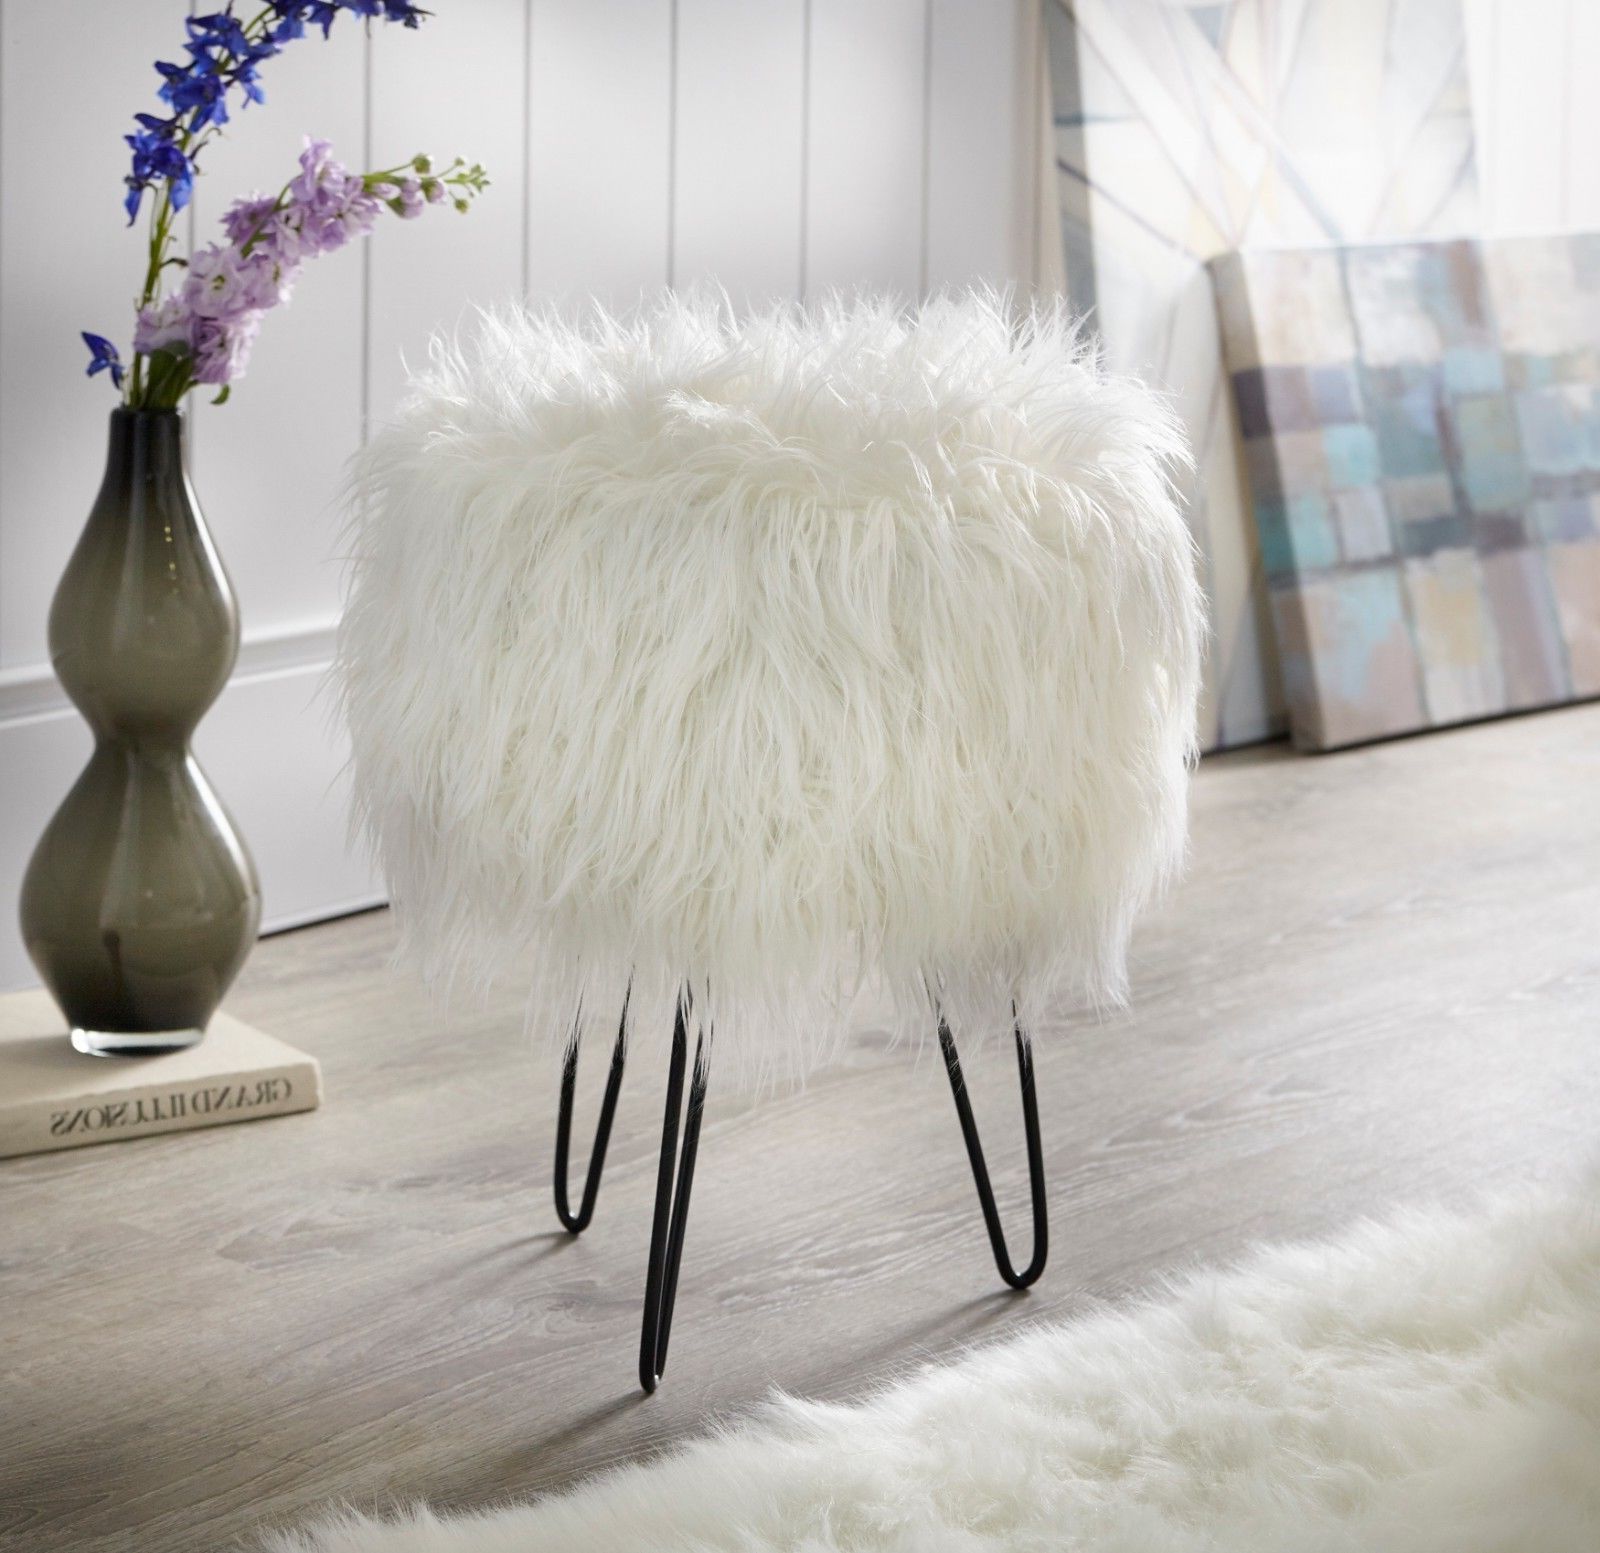 Bohemian Glam 14" Round White Faux Fur Ottoman Footstool Footrest Intended For Well Known White Faux Fur And Gold Metal Ottomans (View 2 of 10)